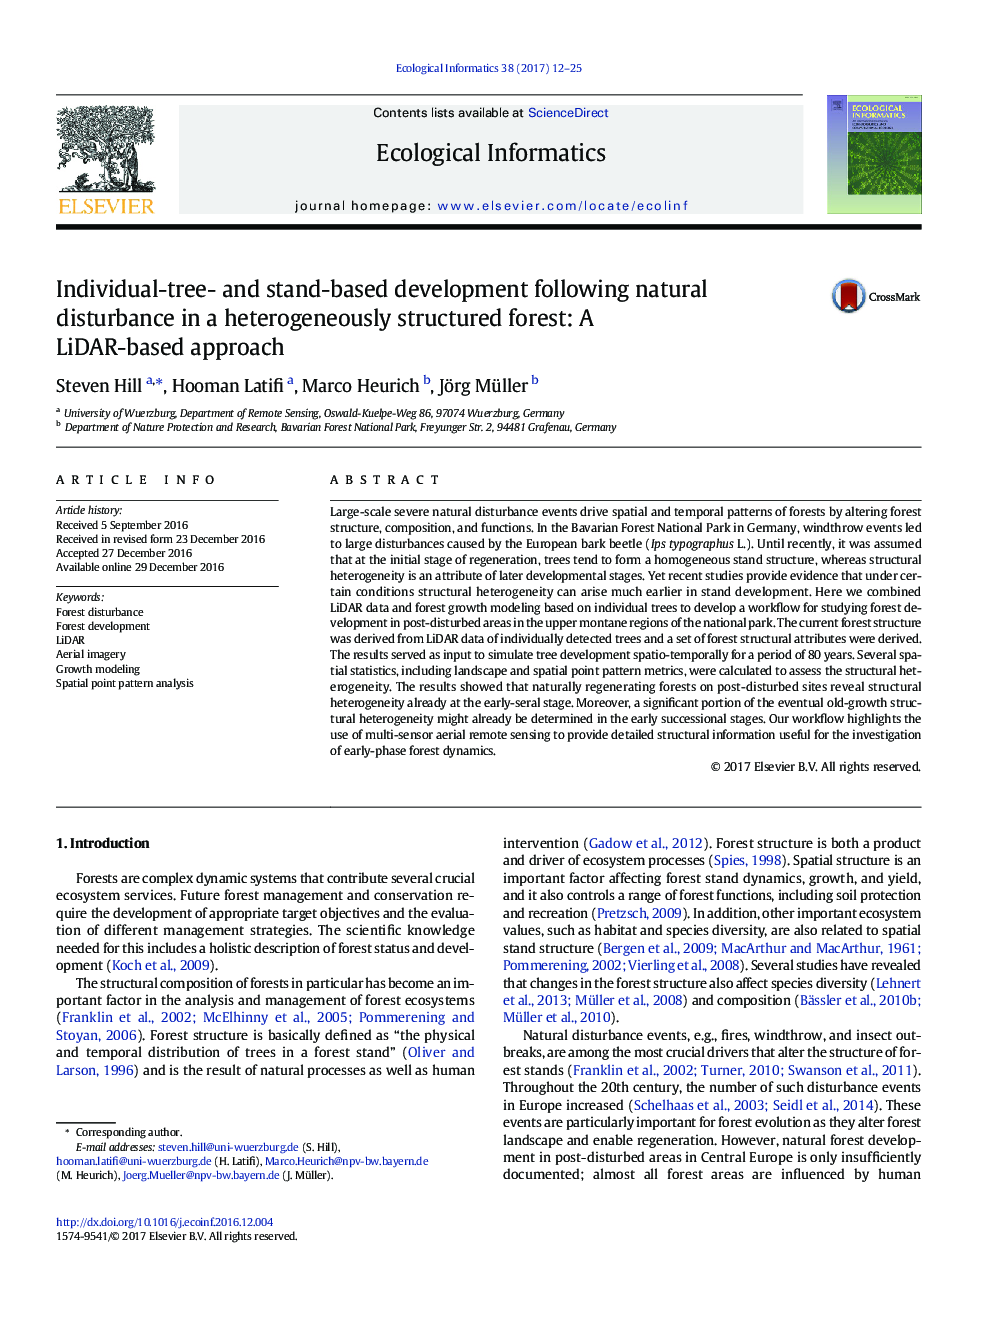 Individual-tree- and stand-based development following natural disturbance in a heterogeneously structured forest: A LiDAR-based approach